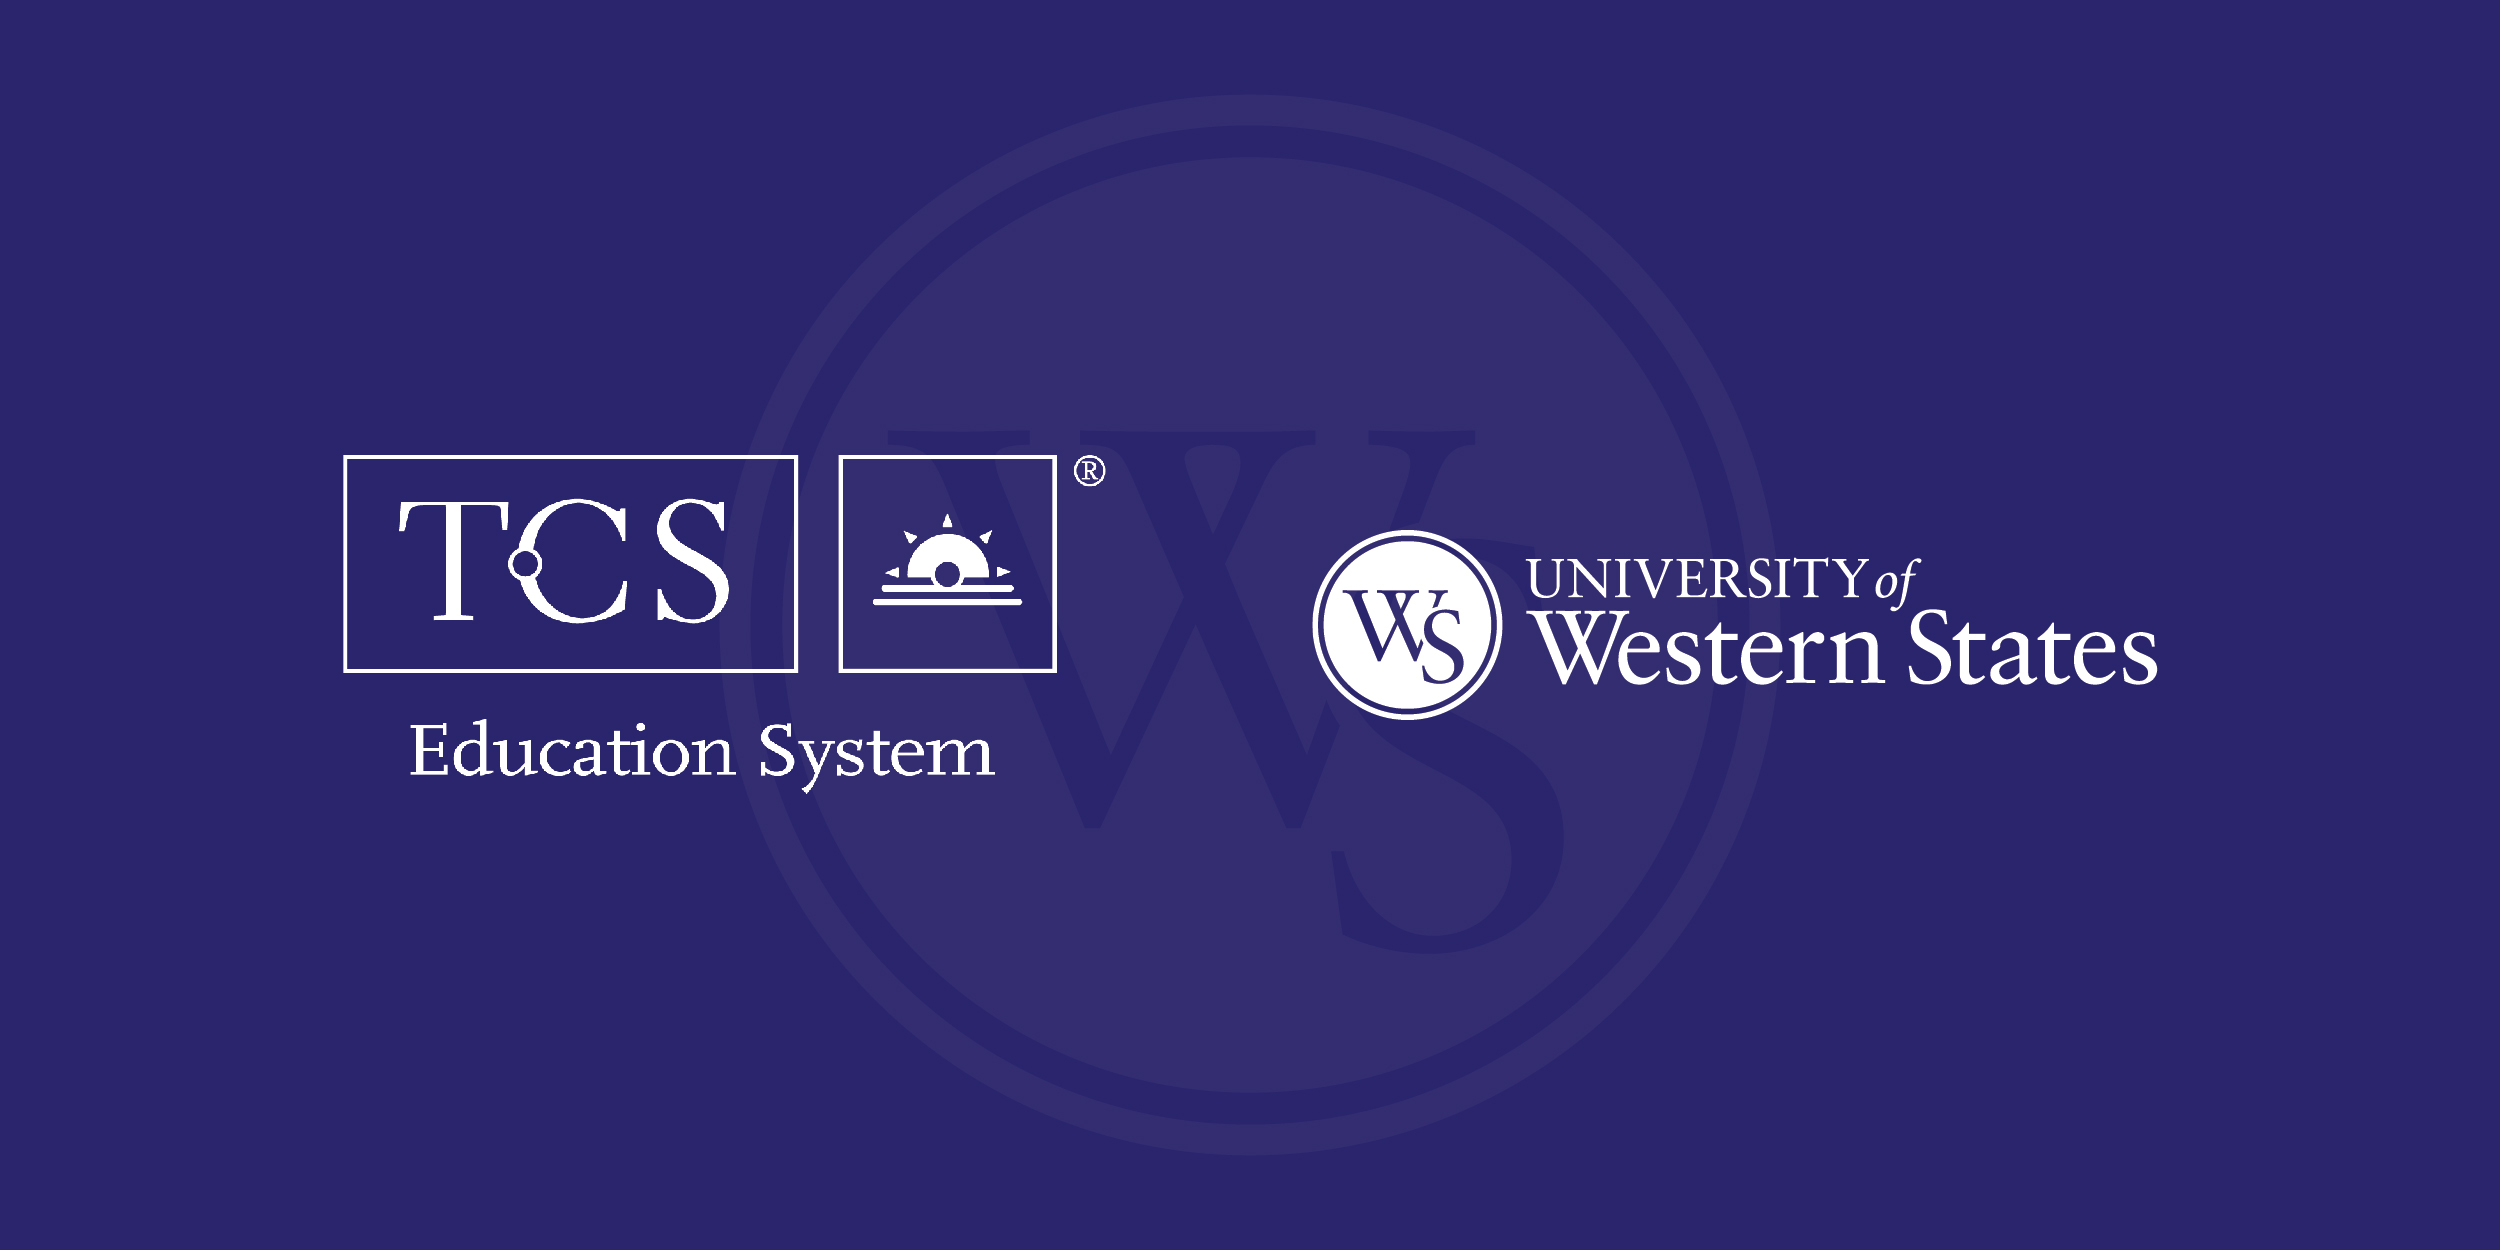 TCS Education System and University of Western States